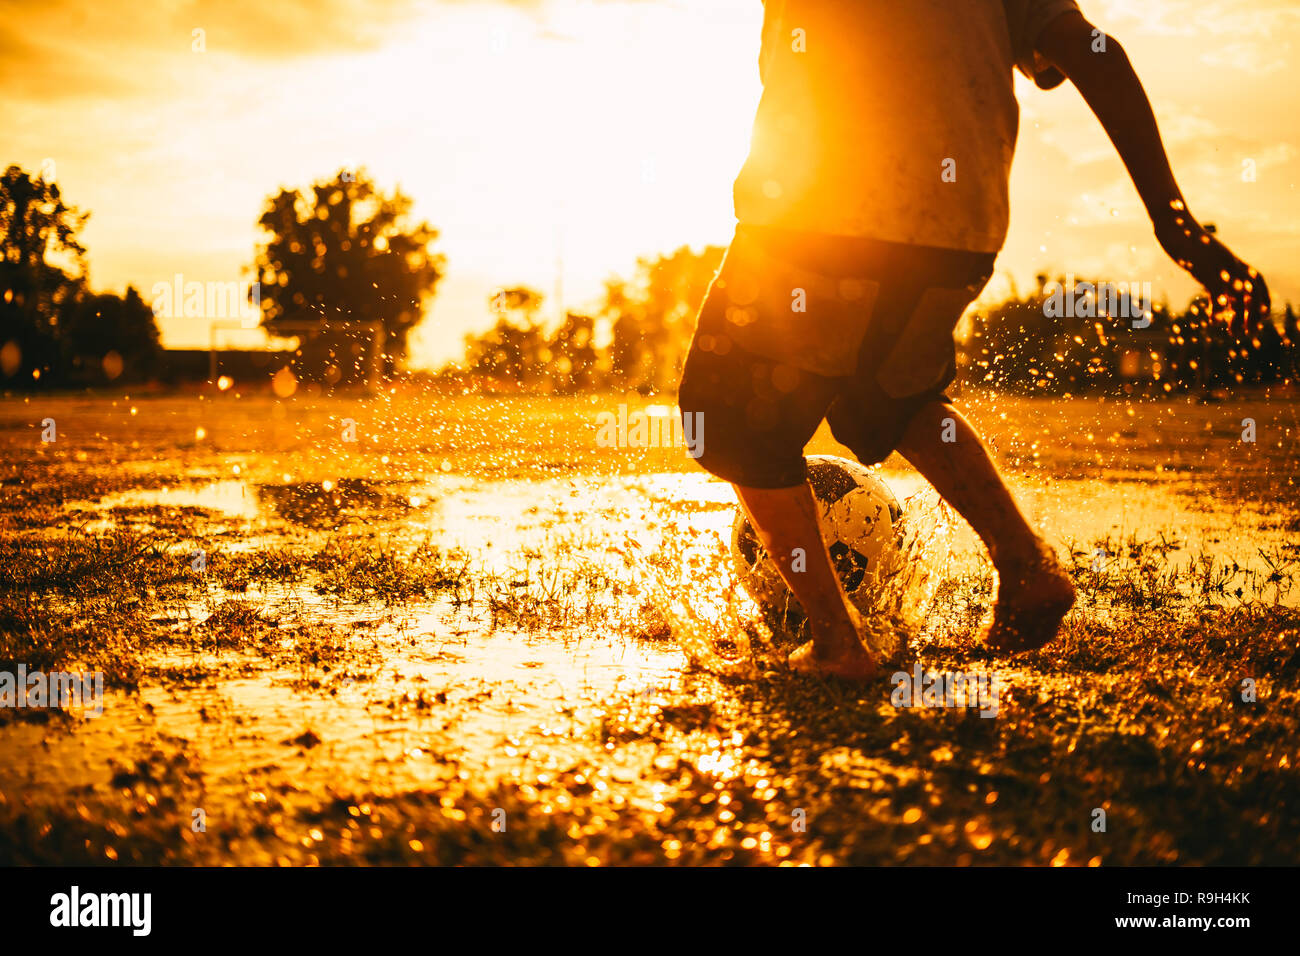 Action sport picture of kids playing soccer football among the rain for exercise in community rural area under the sunset. Stock Photo